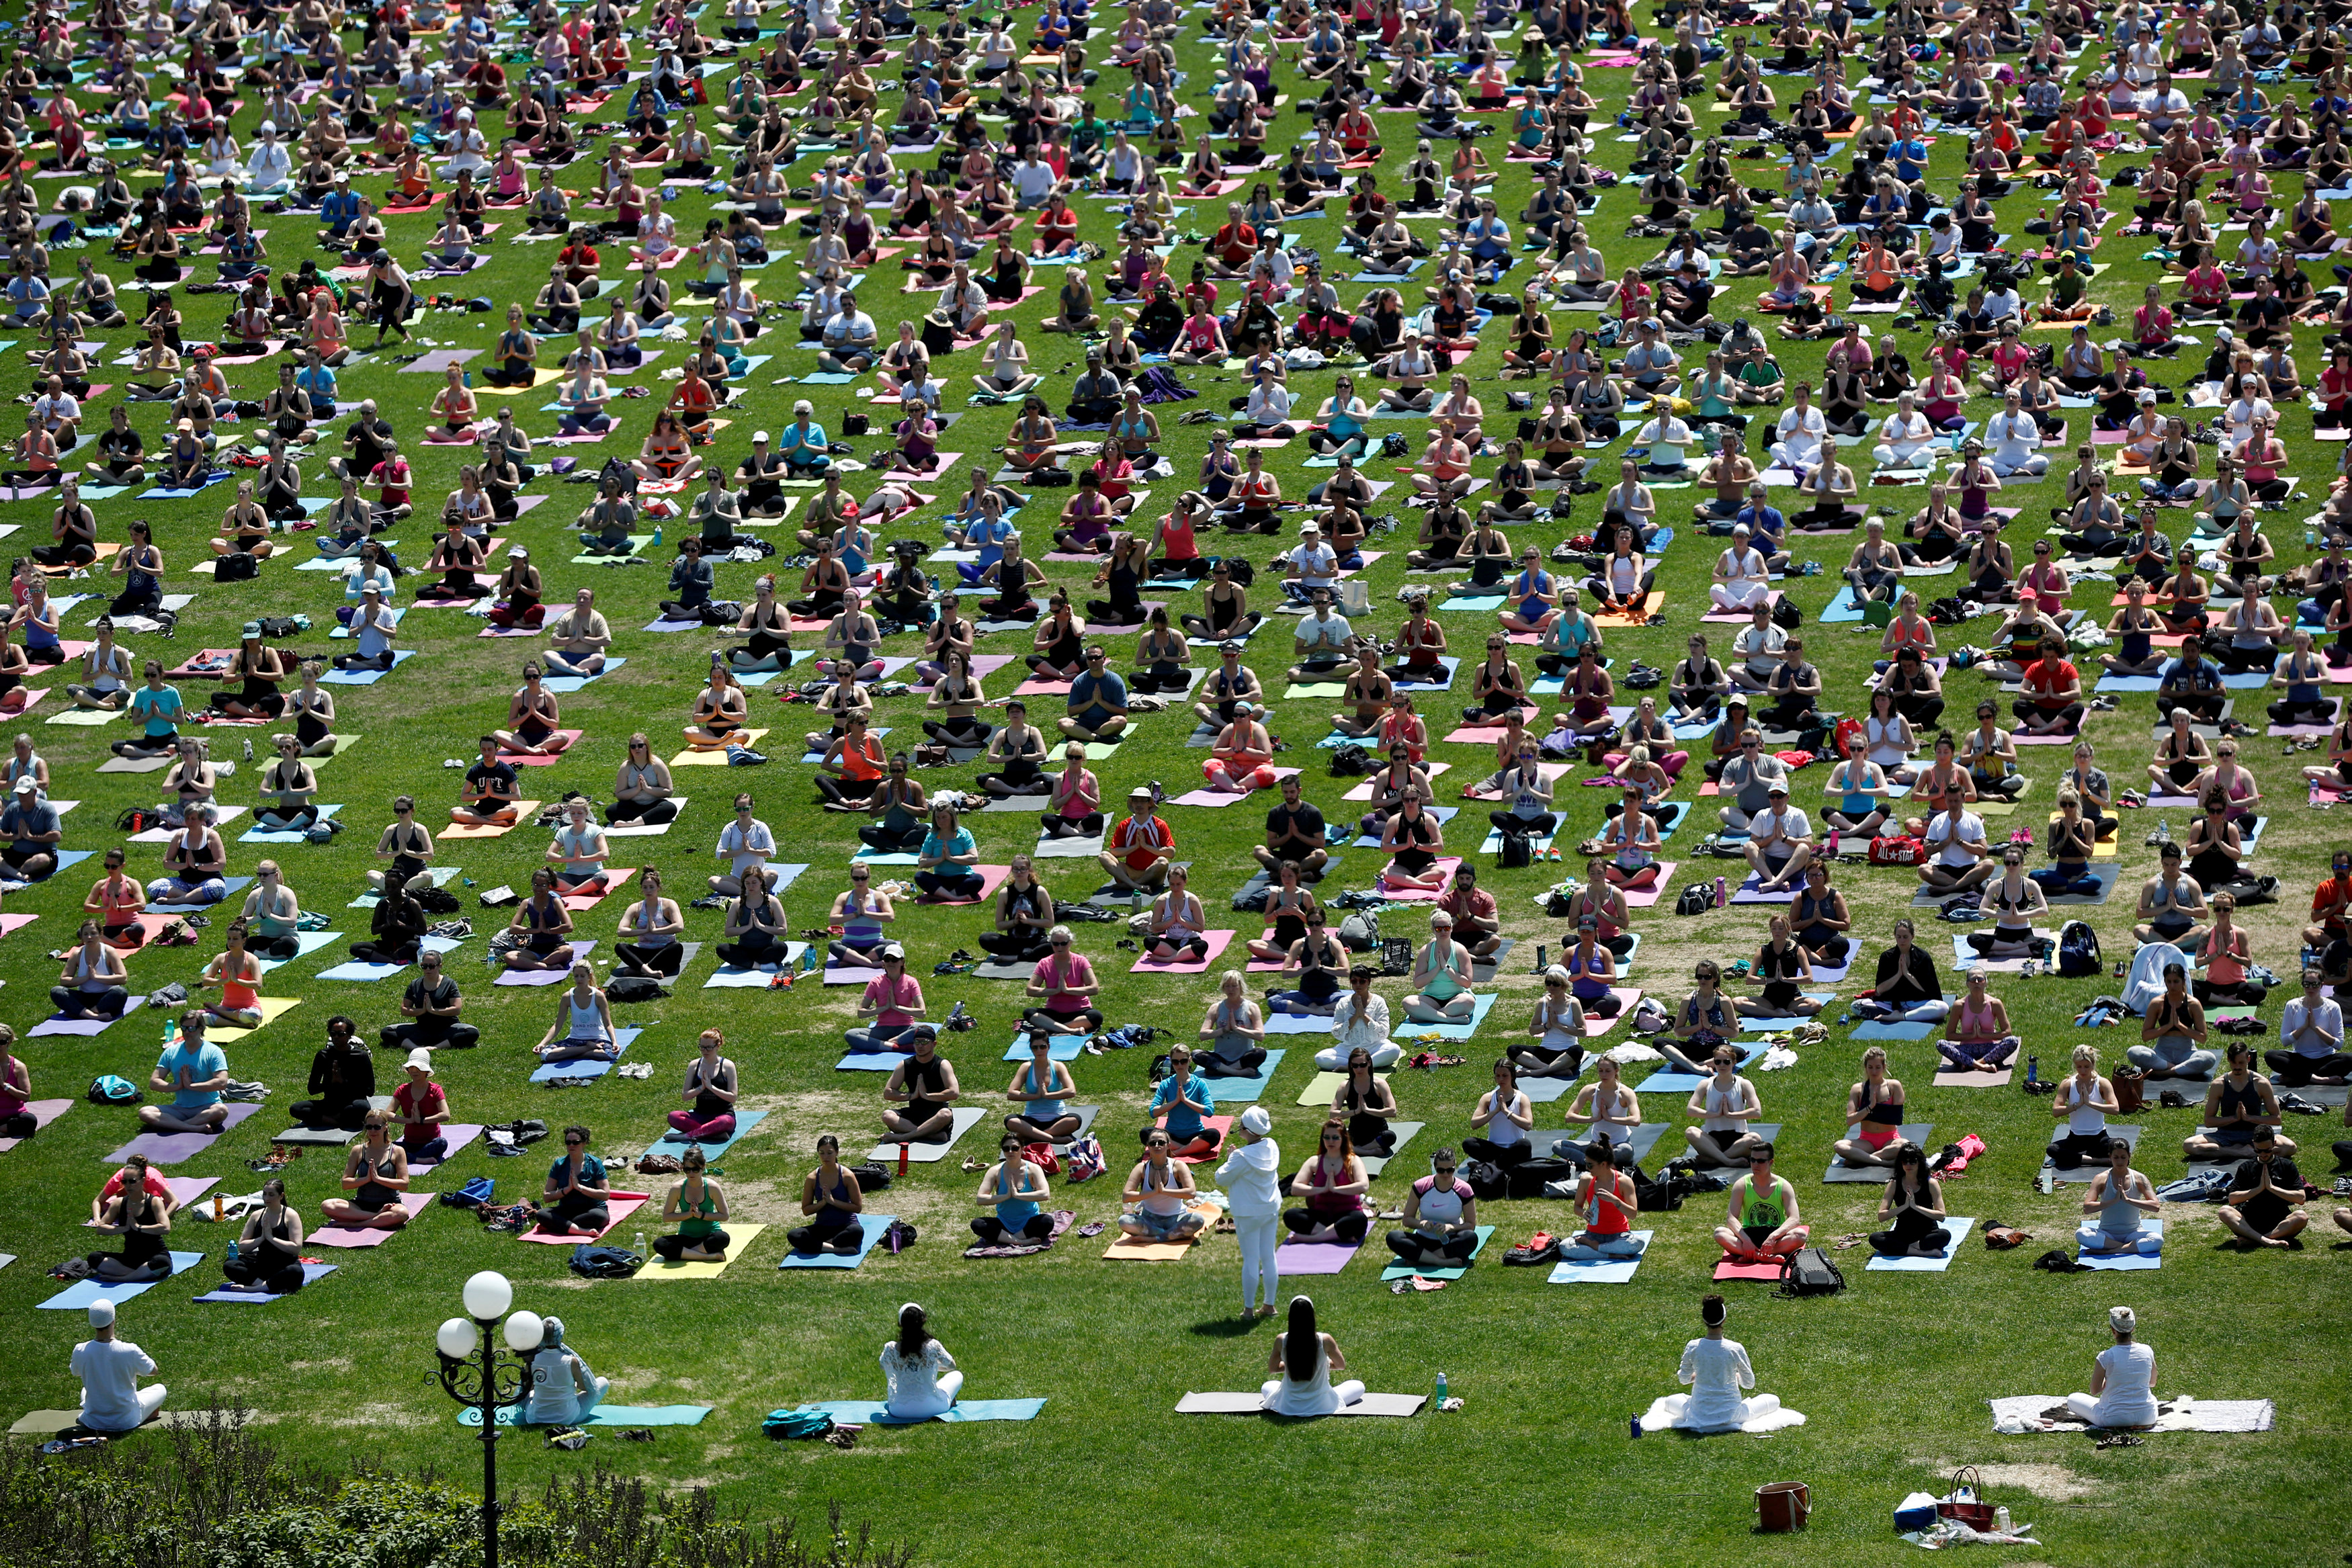 People take part in a weekly yoga class on the front lawn of Parliament Hill in Ottawa